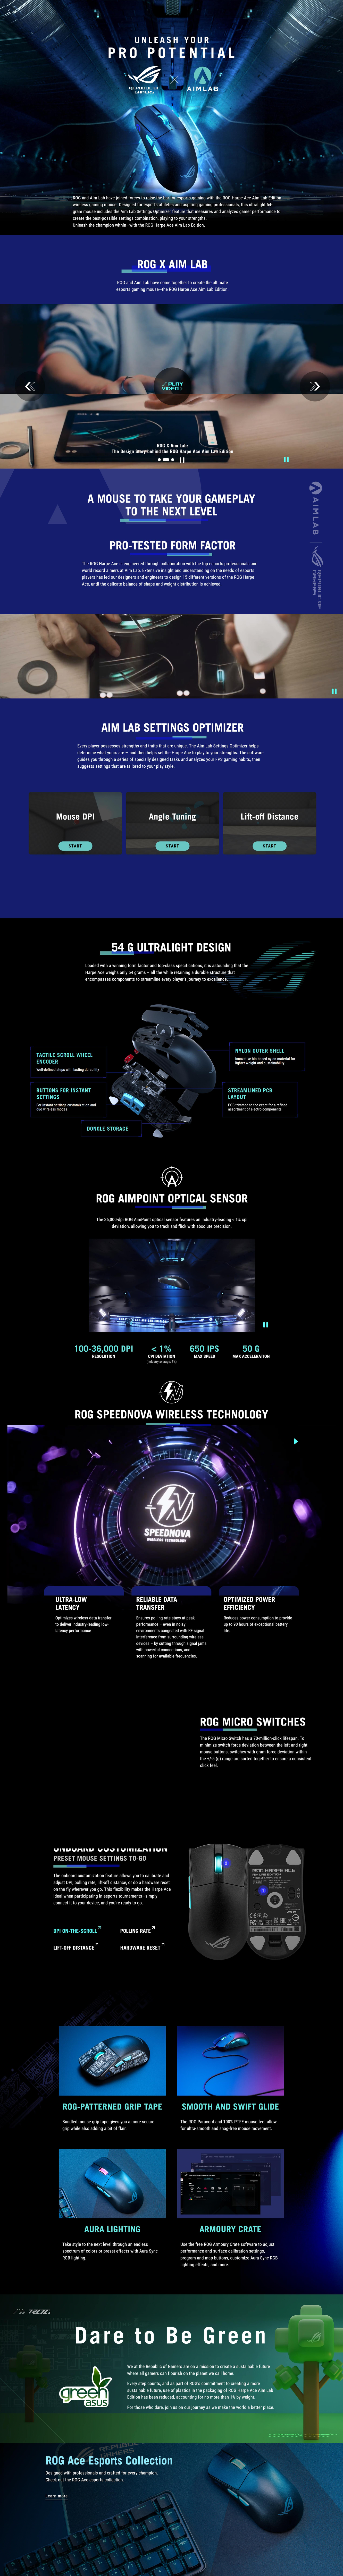 A large marketing image providing additional information about the product ASUS ROG Harpe Ace Wireless Gaming Mouse - Aim Lab Edition - Additional alt info not provided